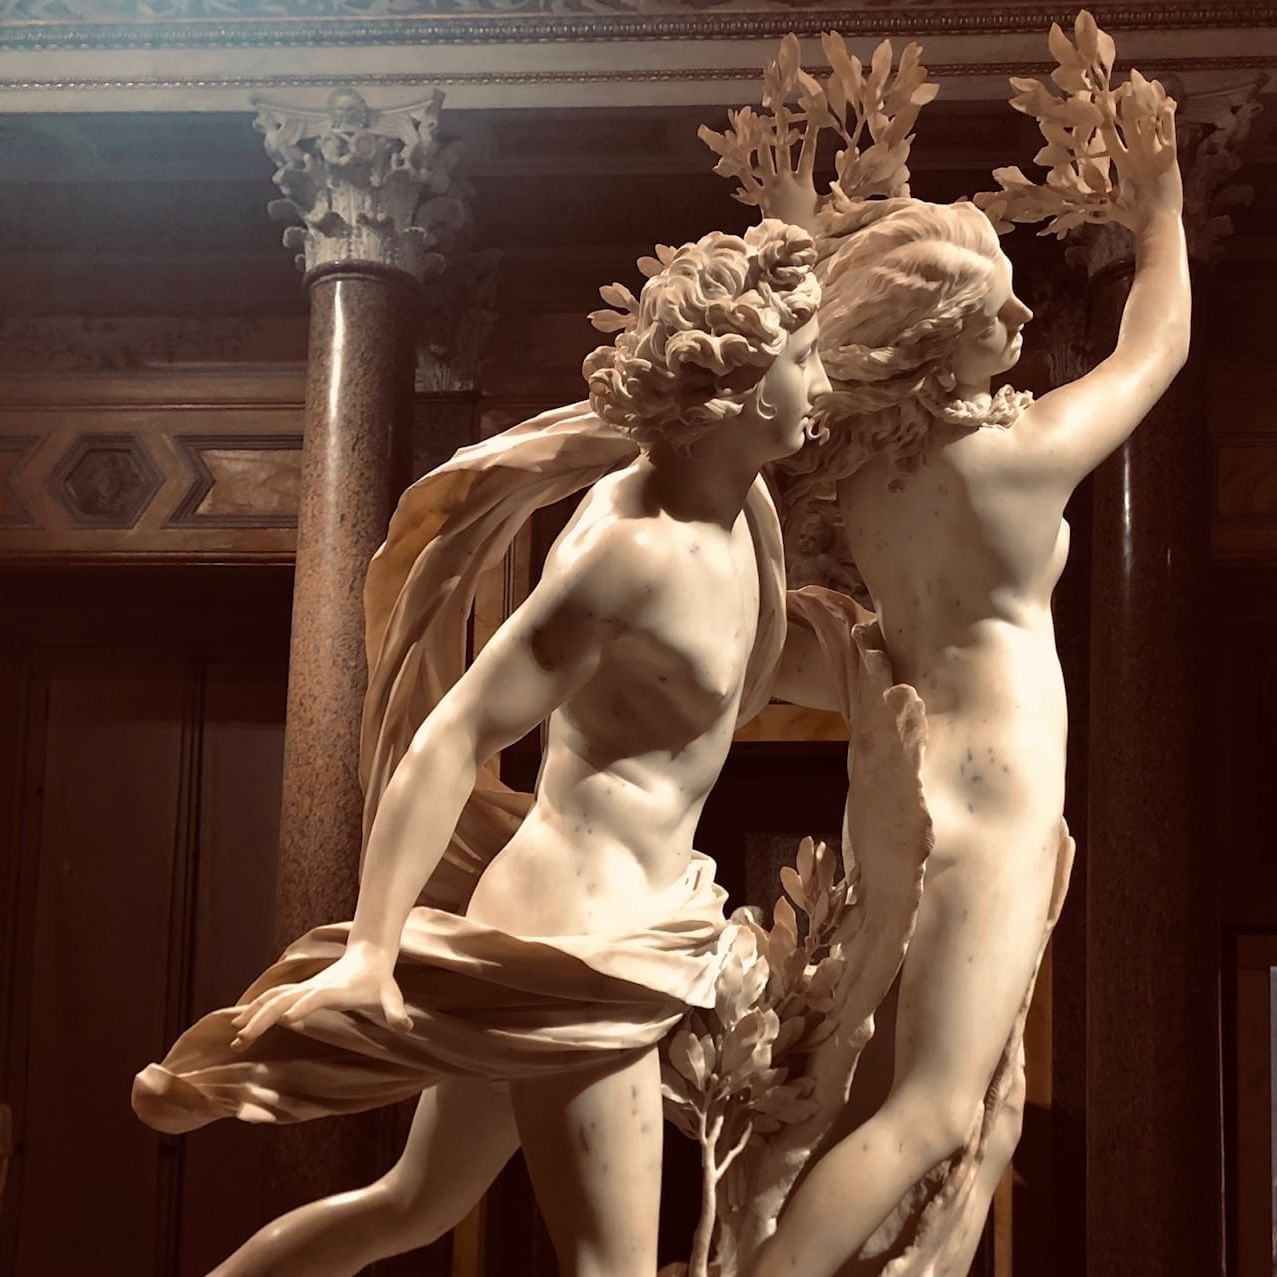 Statue of Apollo and Daphne near Rome Luxury Suites